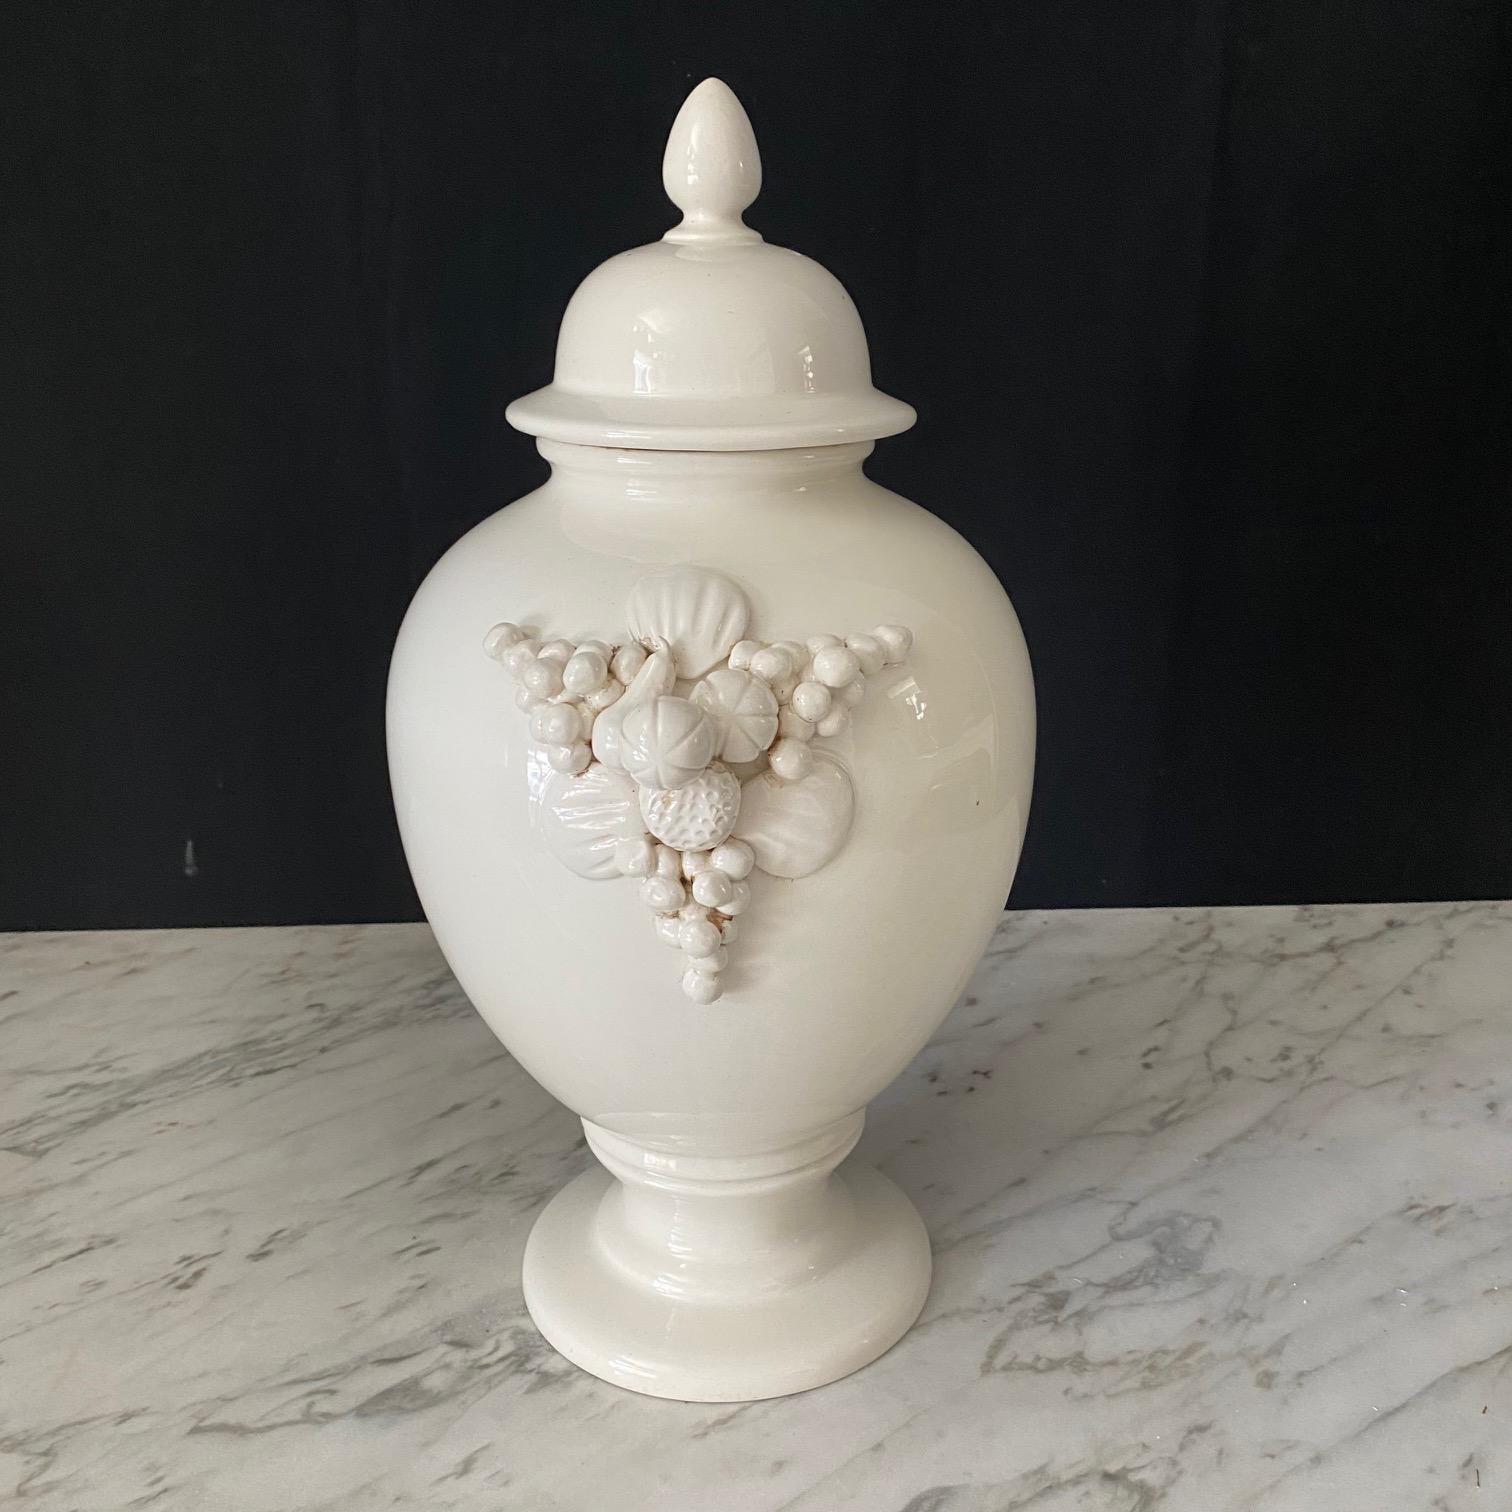 A pair of large Italian white ceramic urn vases with lovely round lids and fruit garlands on the sides. 7 point crown maker's mark on the bases; possibly Capodimente.   Elegant decoration for your home!
#7143